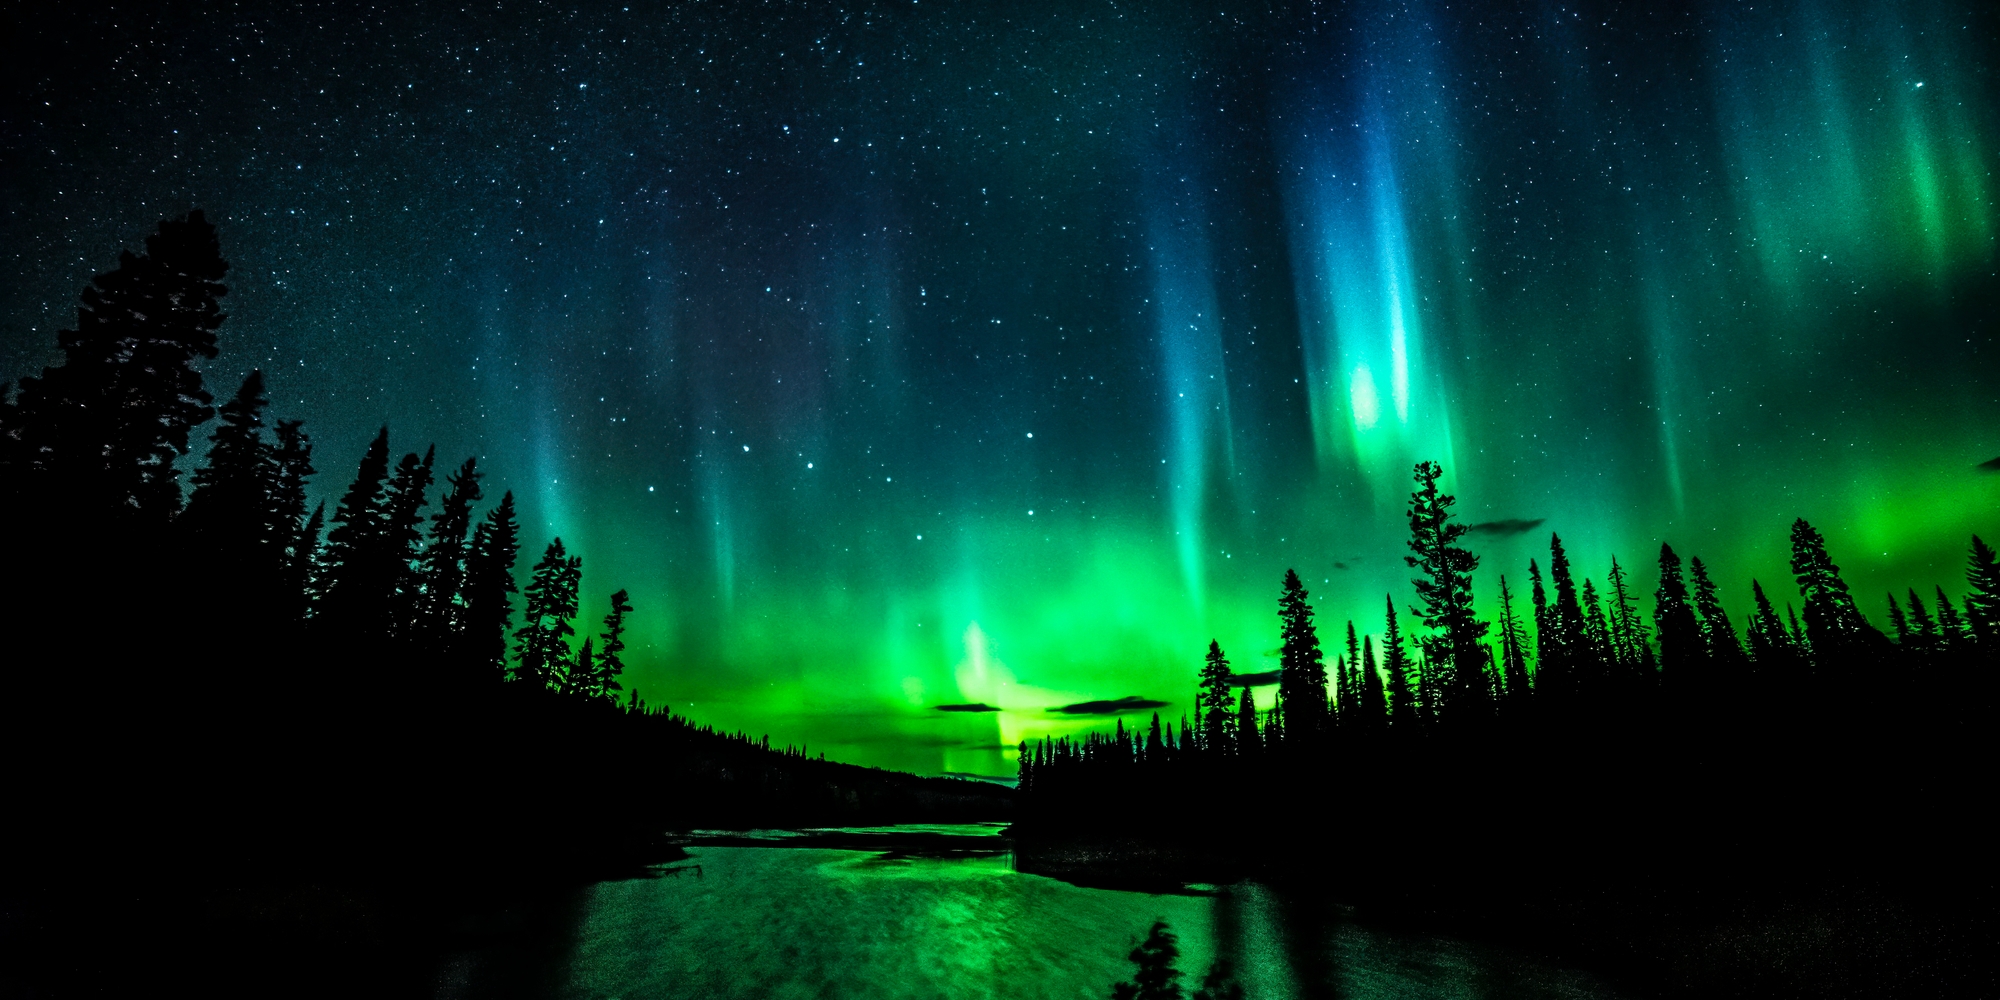 Northern lights in Prince George | Northern BC Tourism/Kristopher Foot